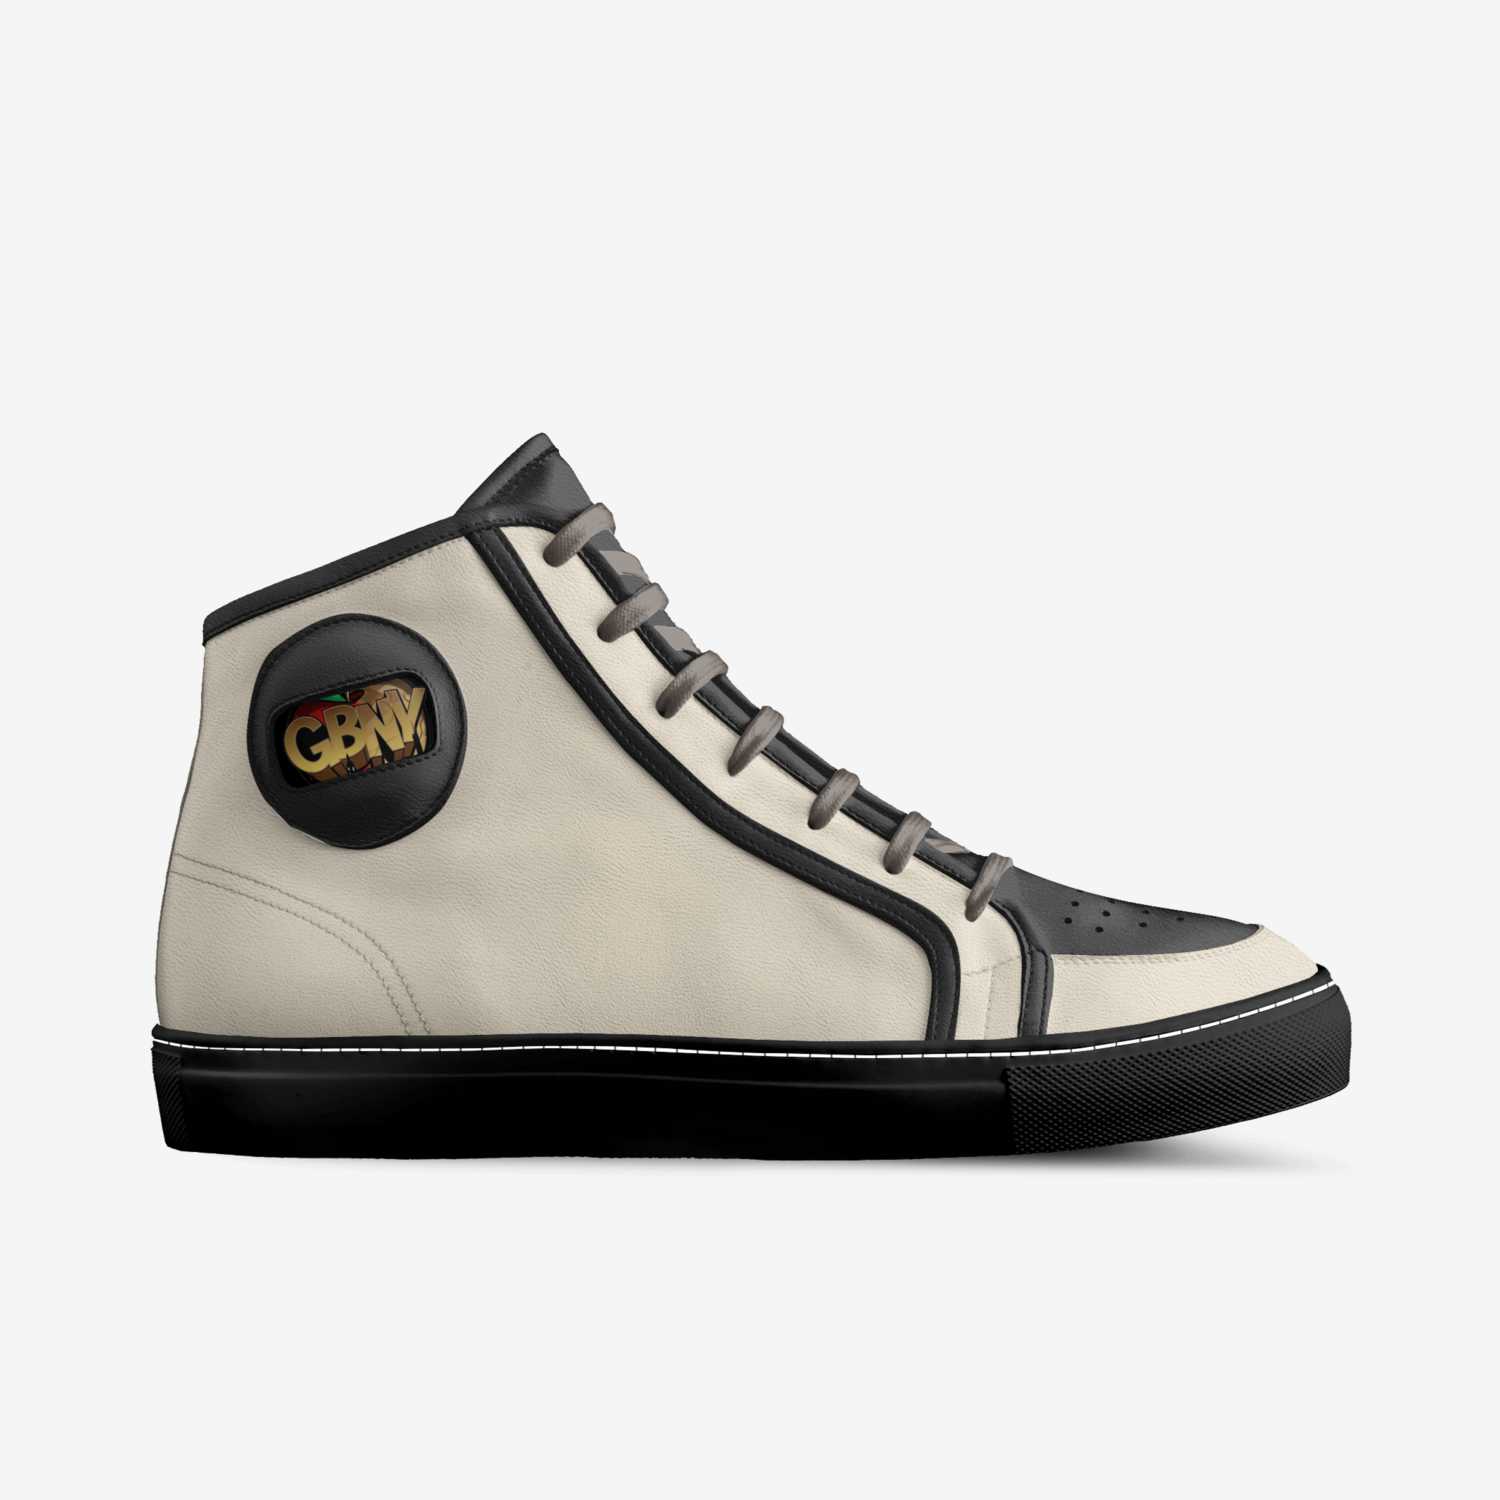 GBNY LLC custom made in Italy shoes by Gerald Boyd | Side view